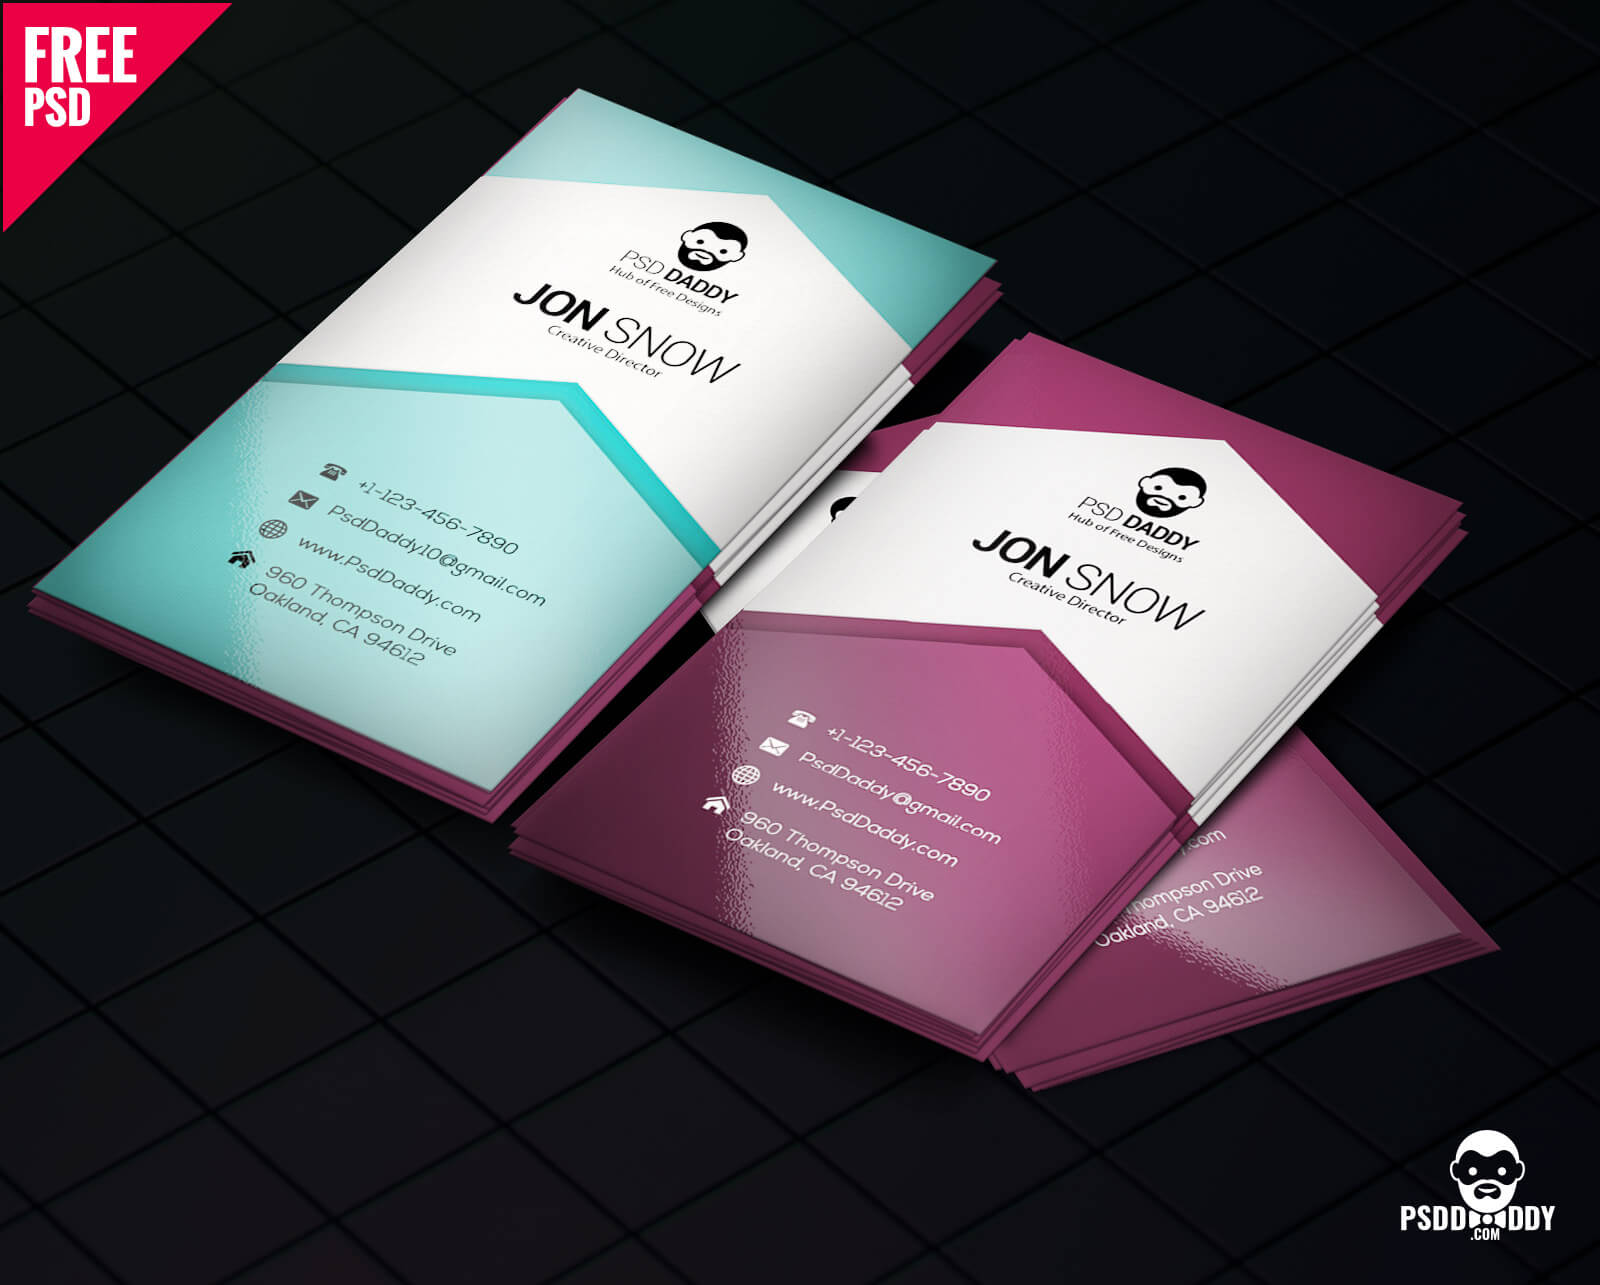 Download]Creative Business Card Psd Free | Psddaddy With Creative Business Card Templates Psd